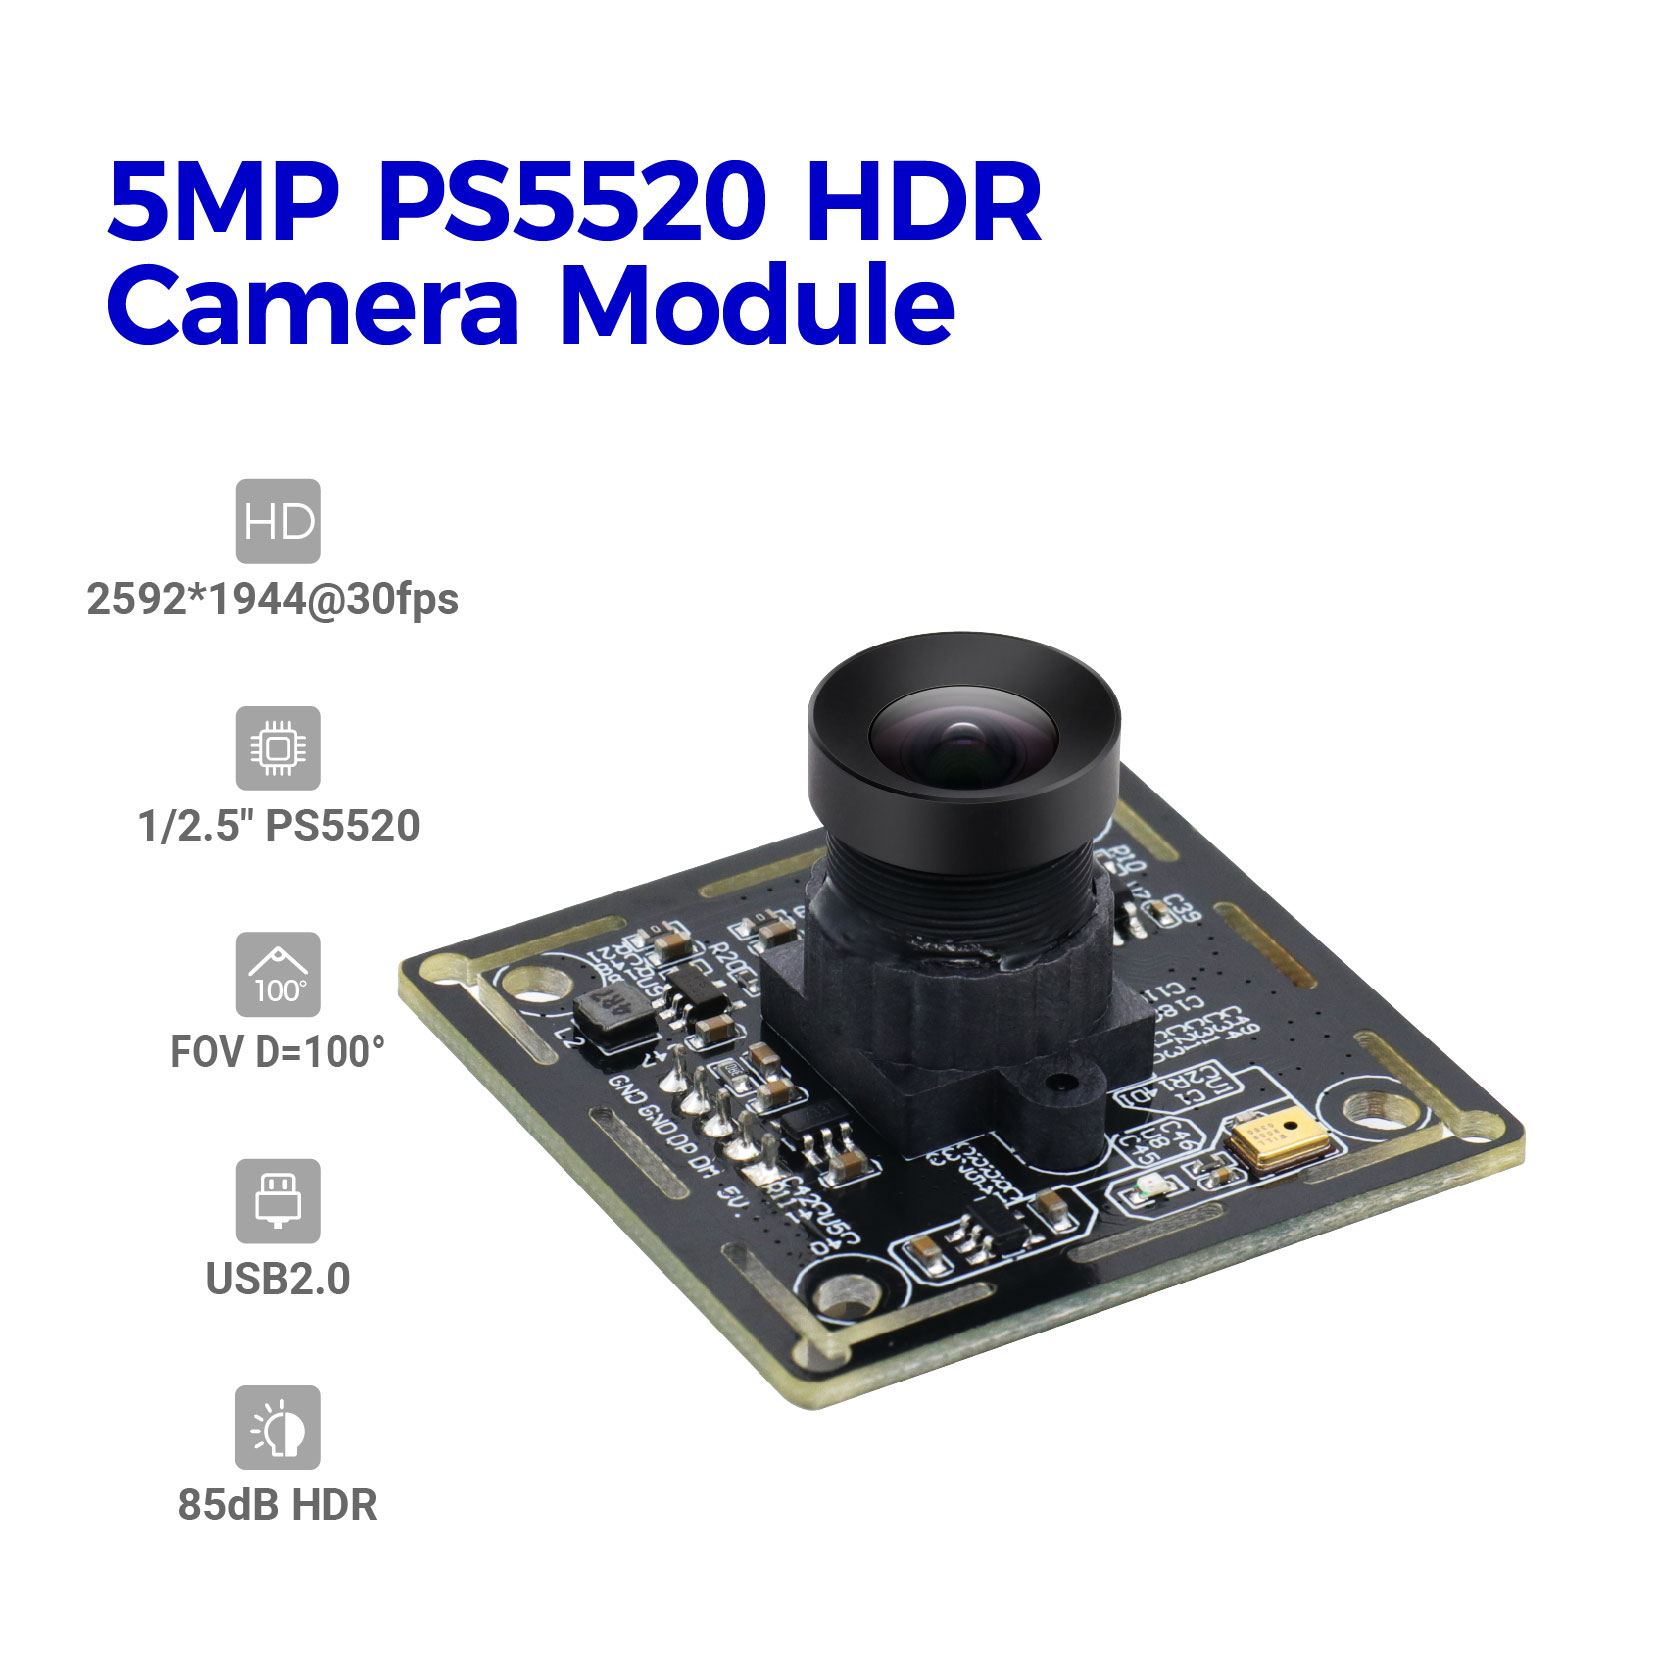 Modul 5MP PS5520 HDR kamery